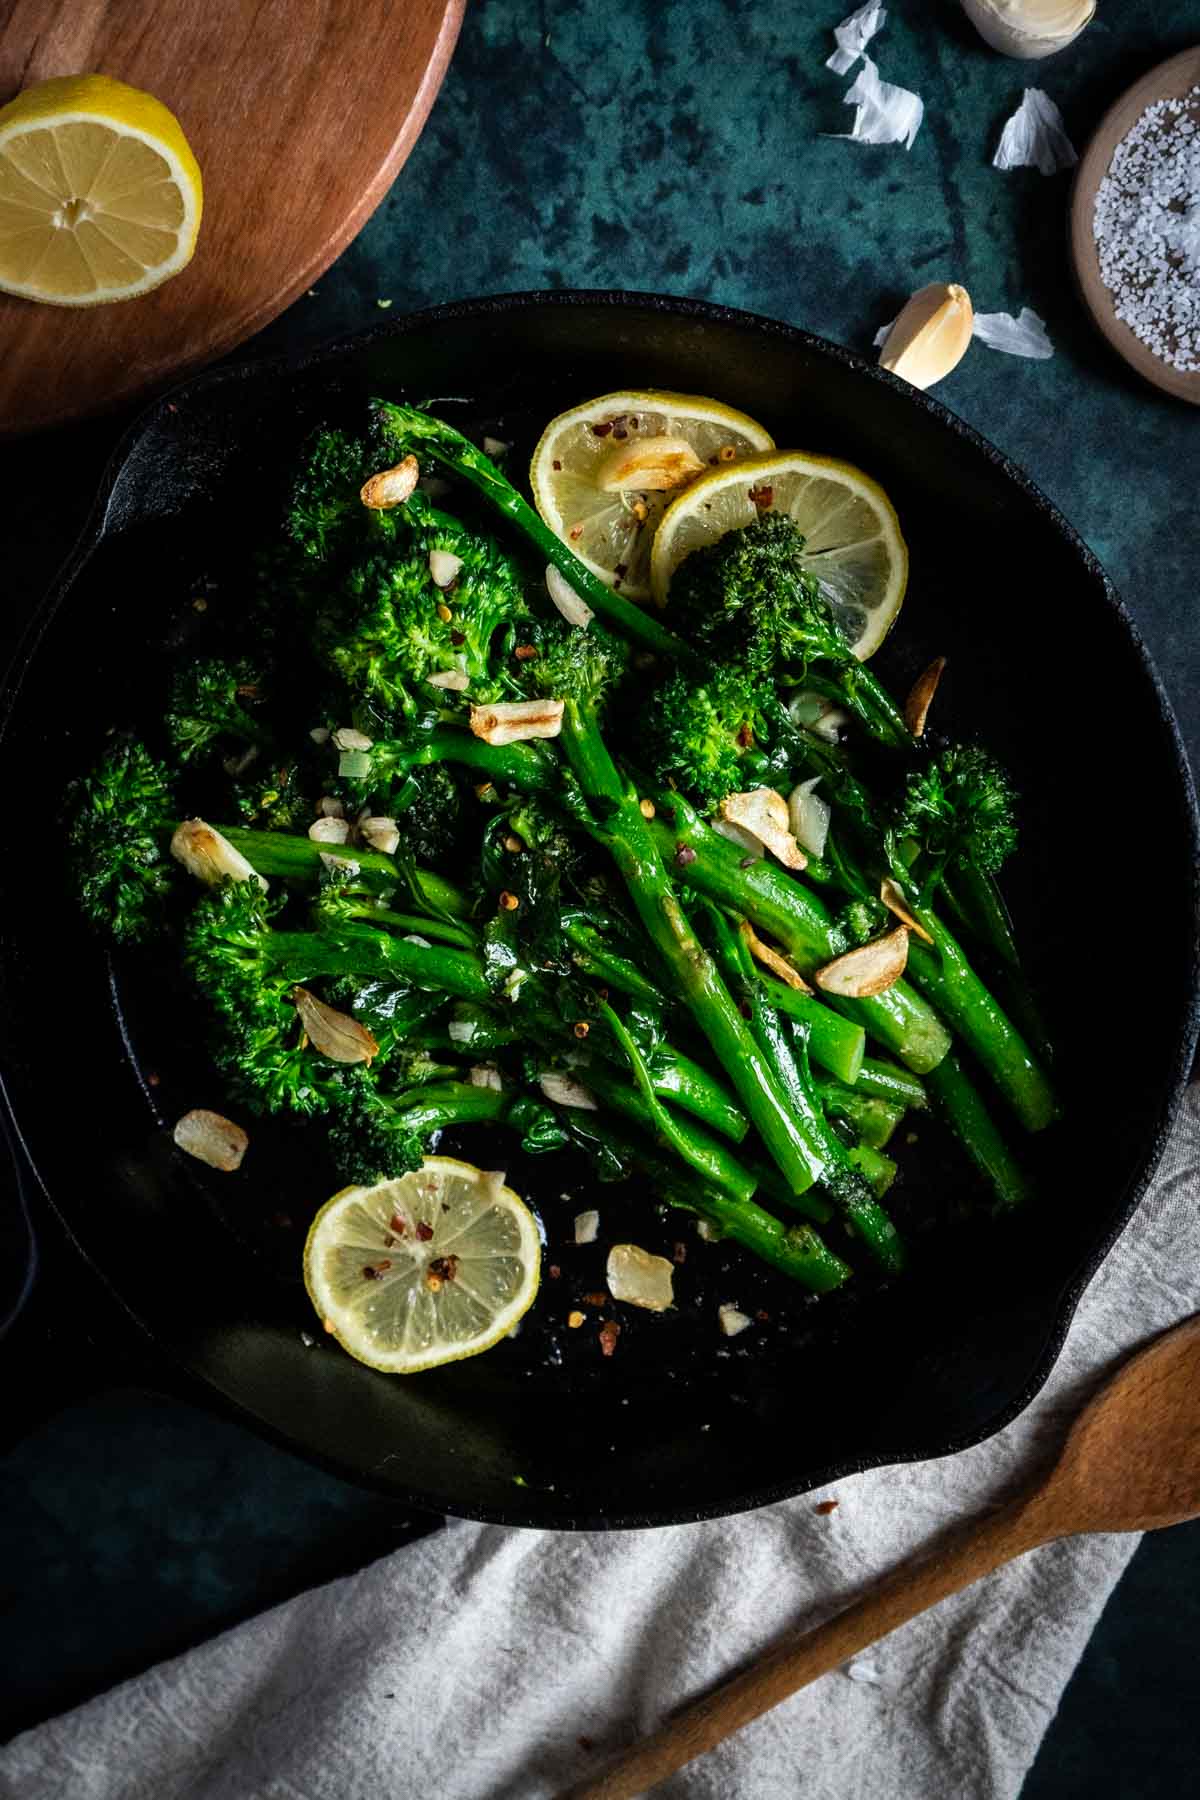 Lemon slices garnished on a plate filled with broccolini and garlic. 